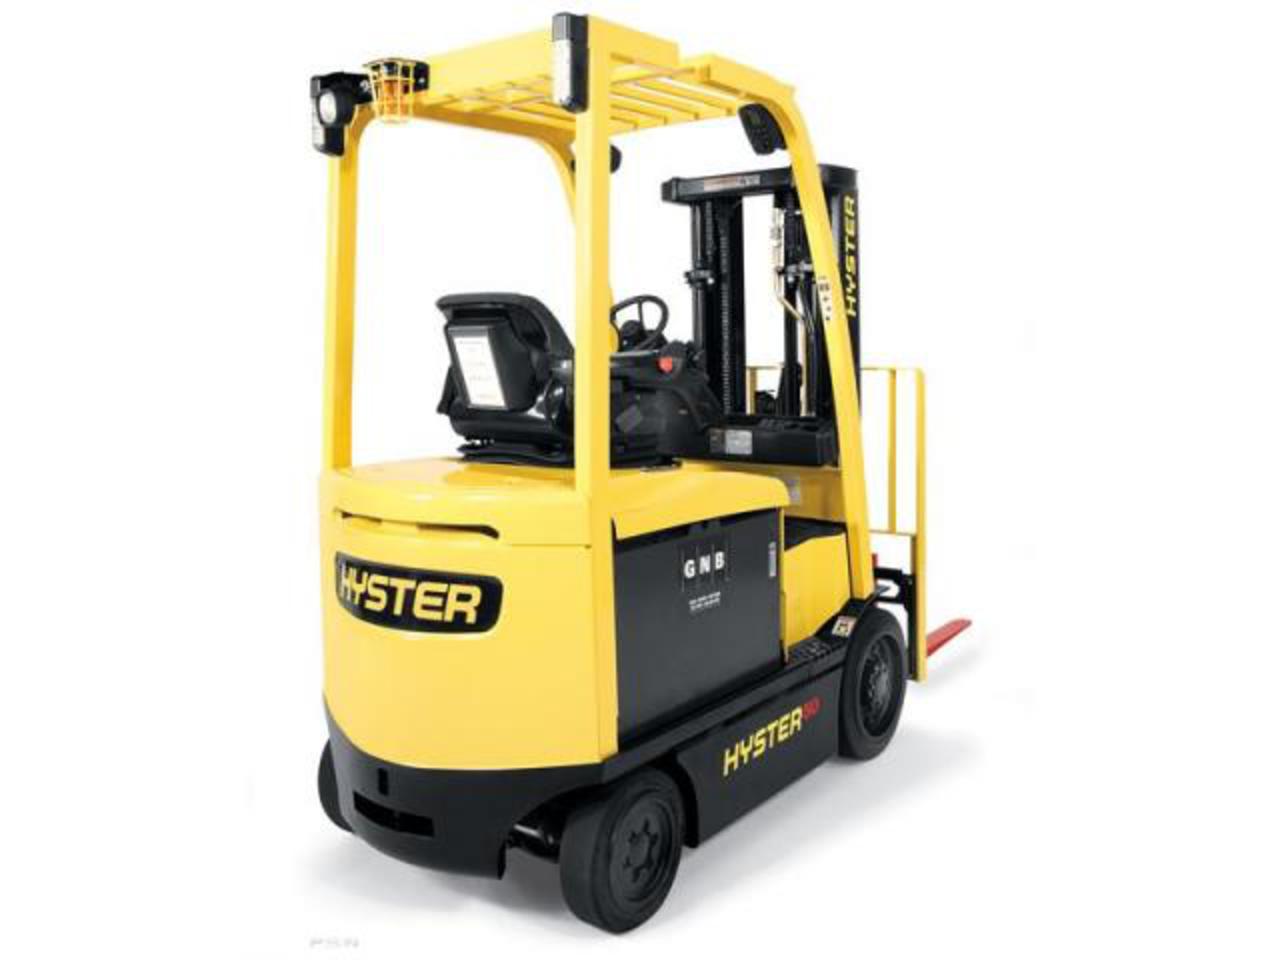 Hyster E60XN Forklift - Price, Specs, Features